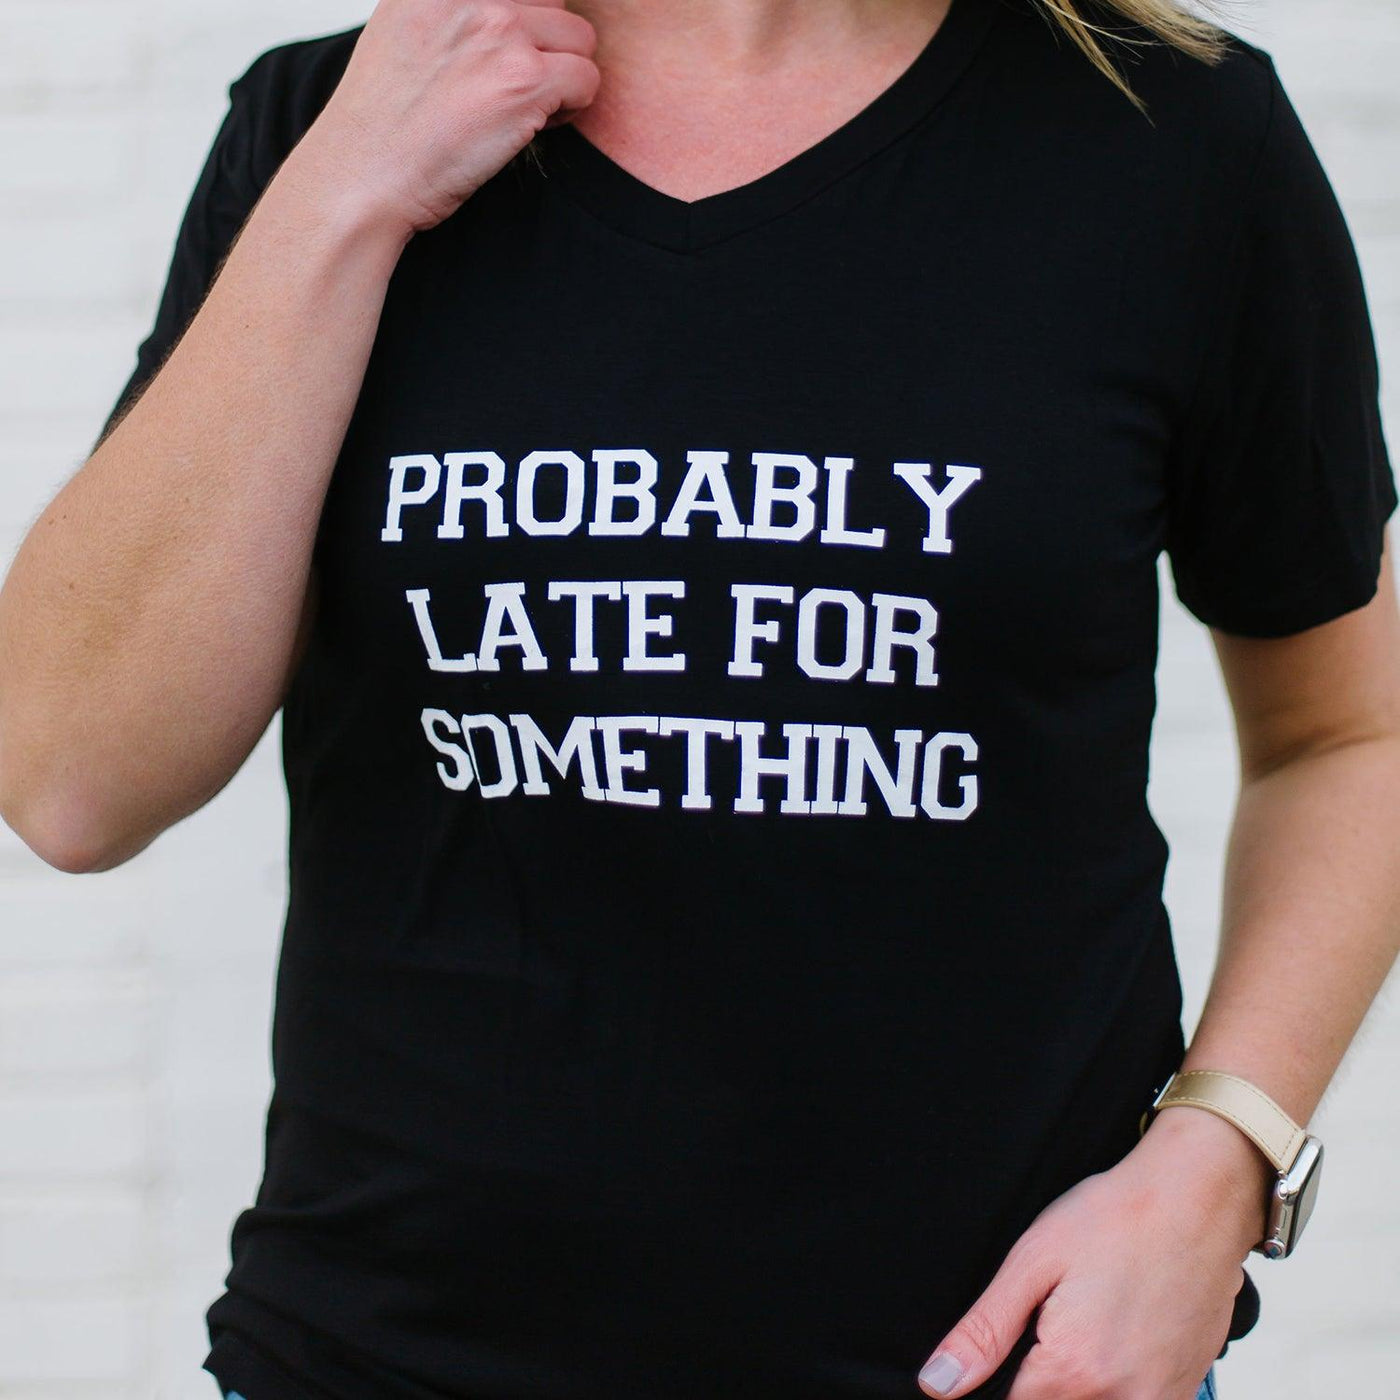 FINAL SALE - Probably Late For Something | Tee - Mary Square, LLC